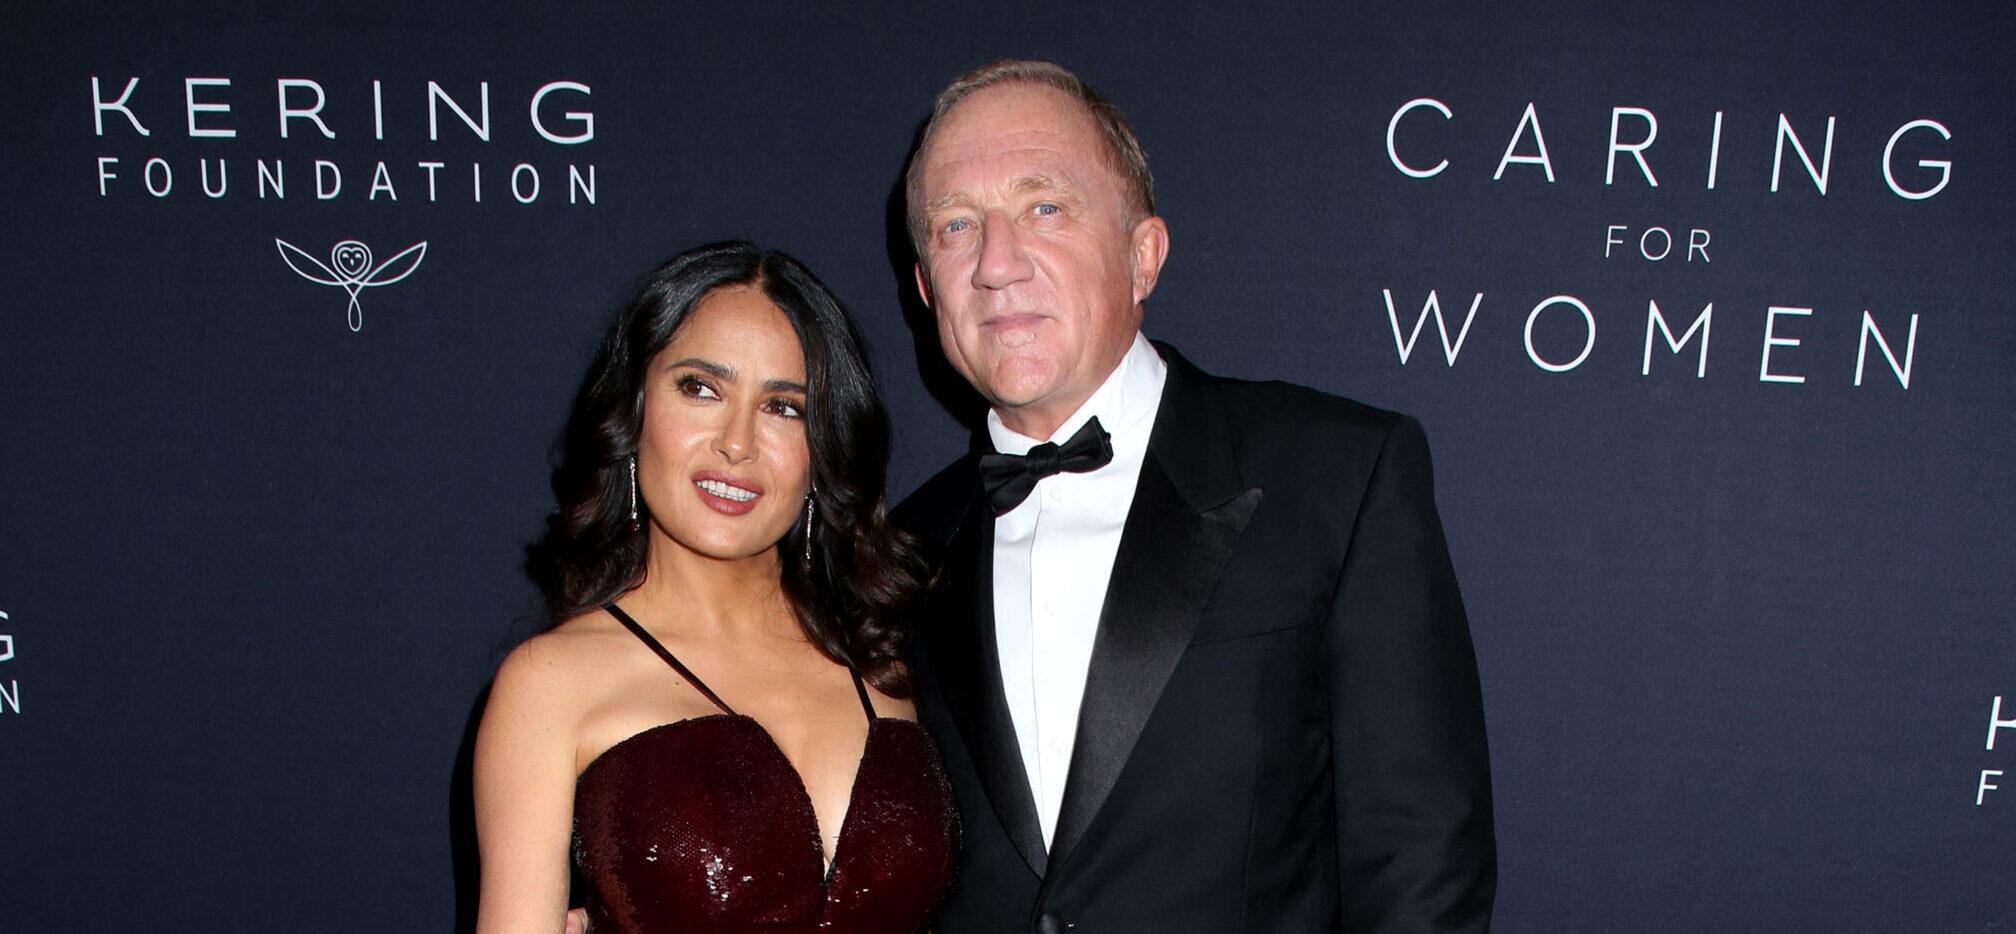 Salma Hayek Shares Star-Studded Snaps From ‘Caring For Women’ Charity Dinner